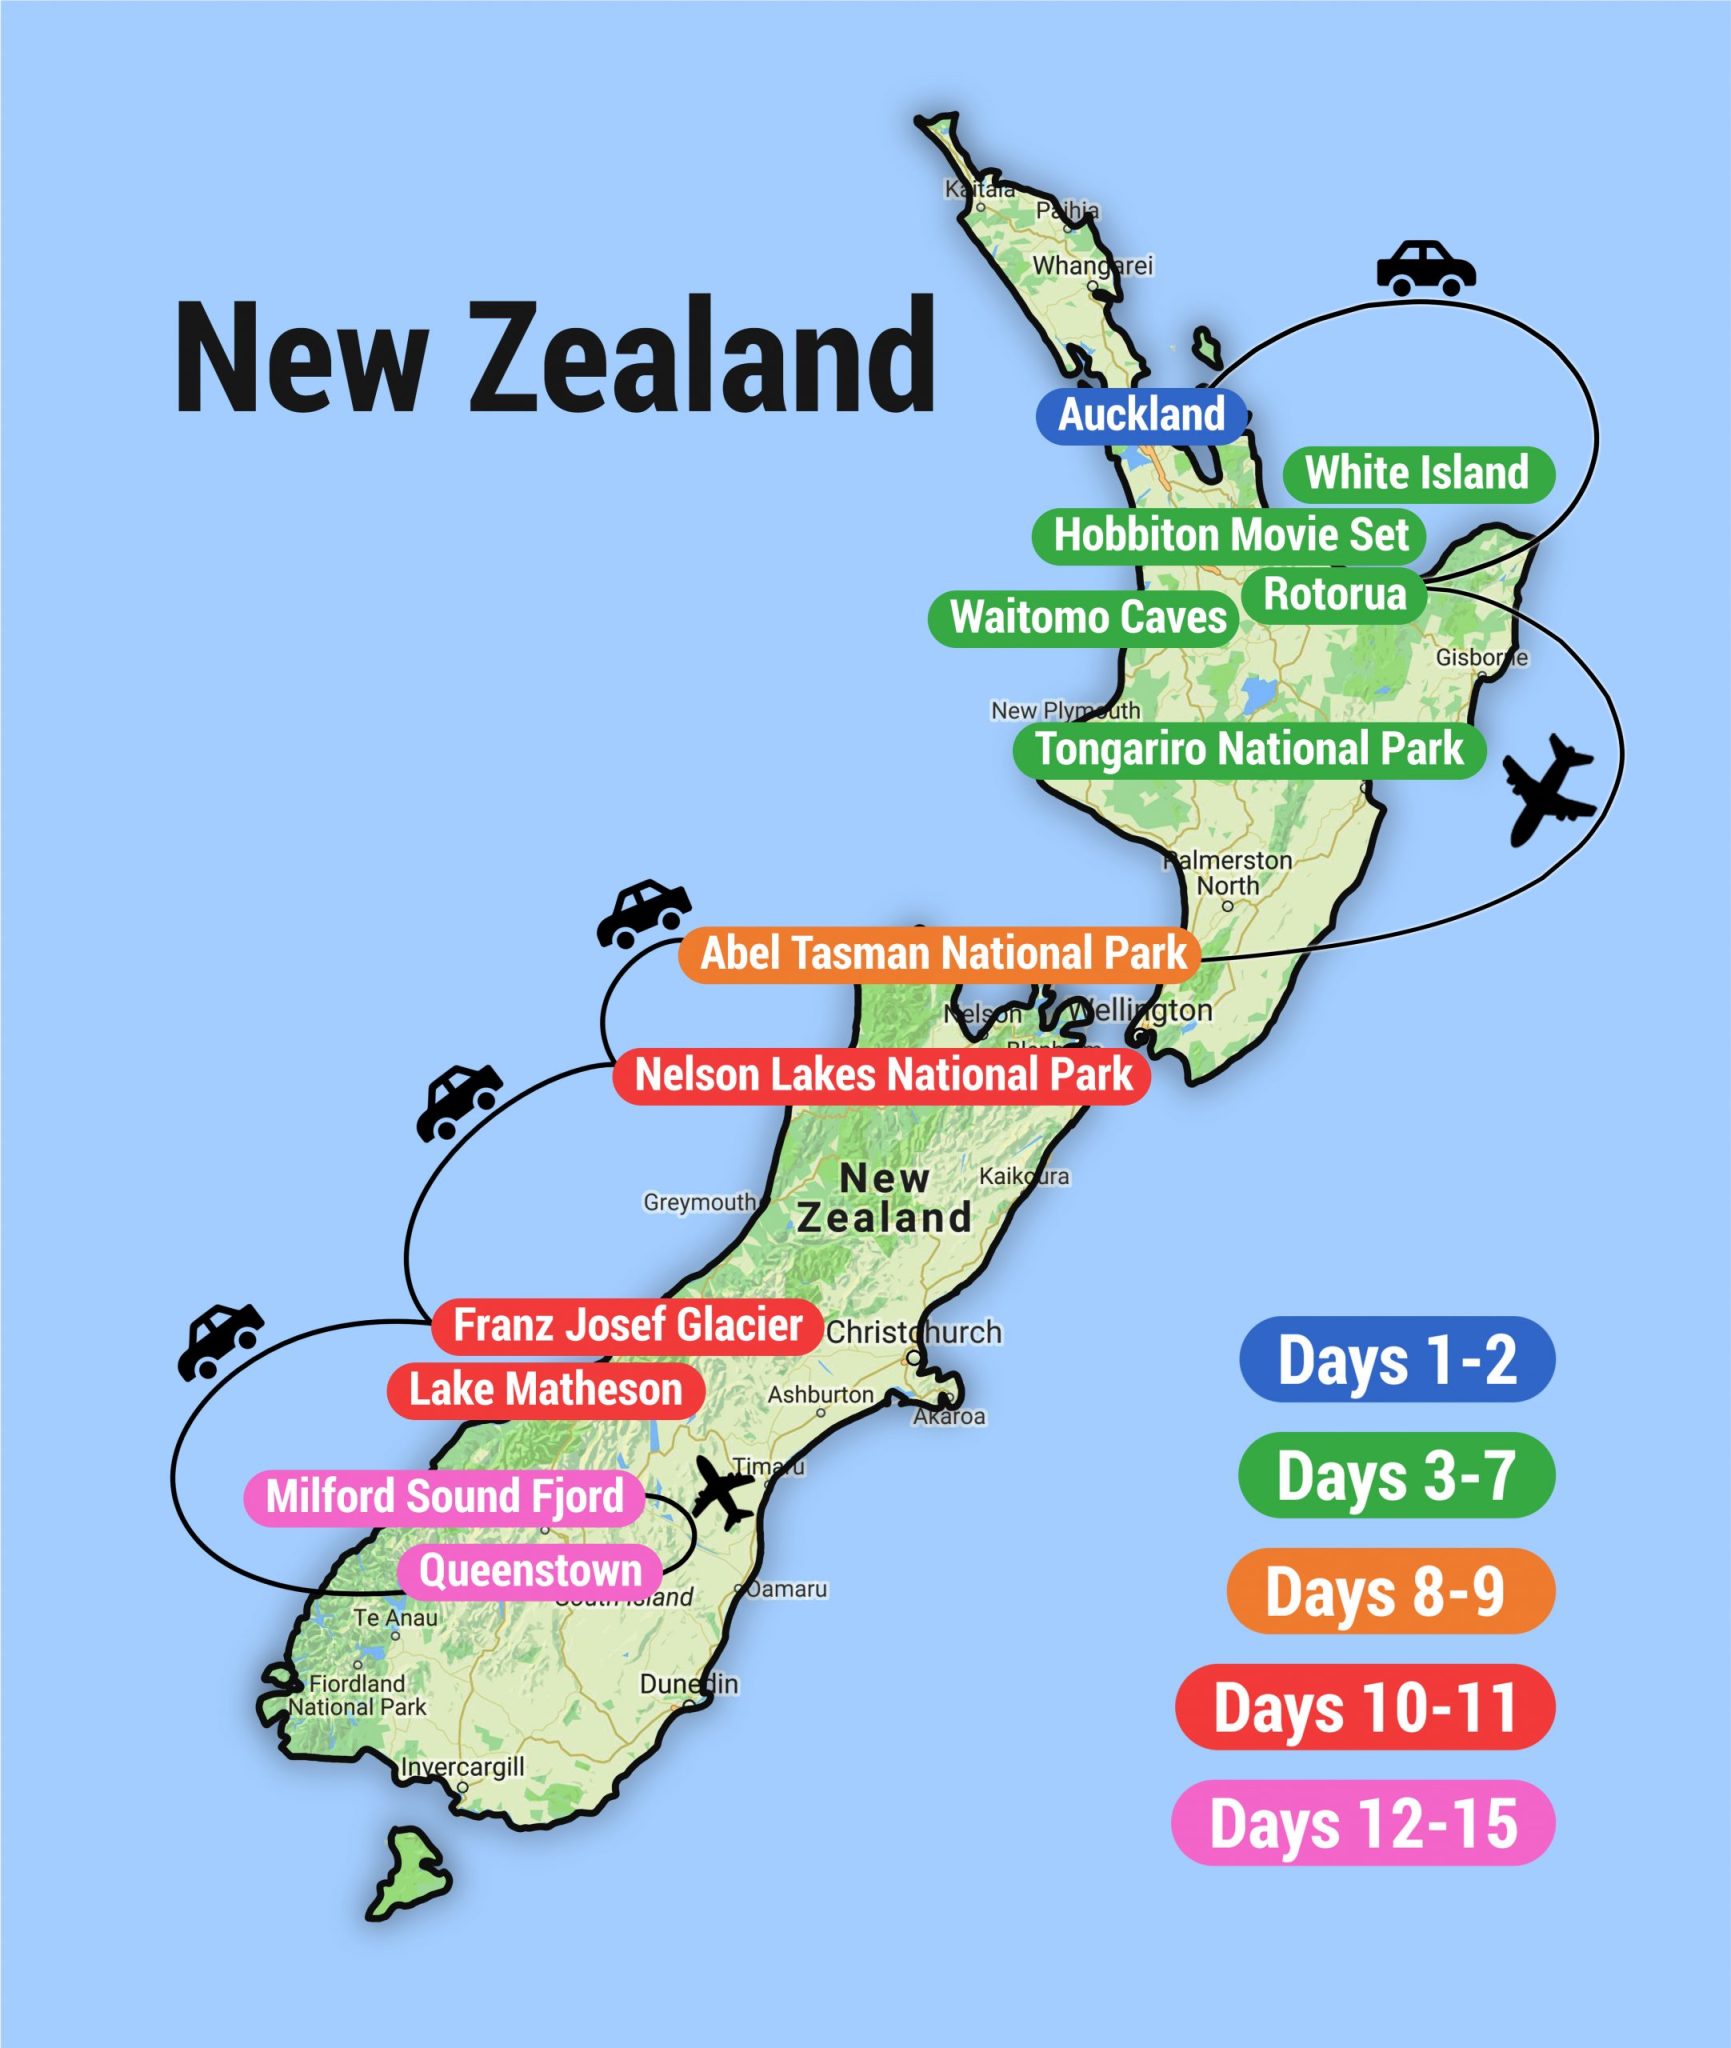 New Zealand: See & Do it ALL in 10 Days, 1st Class Traveling